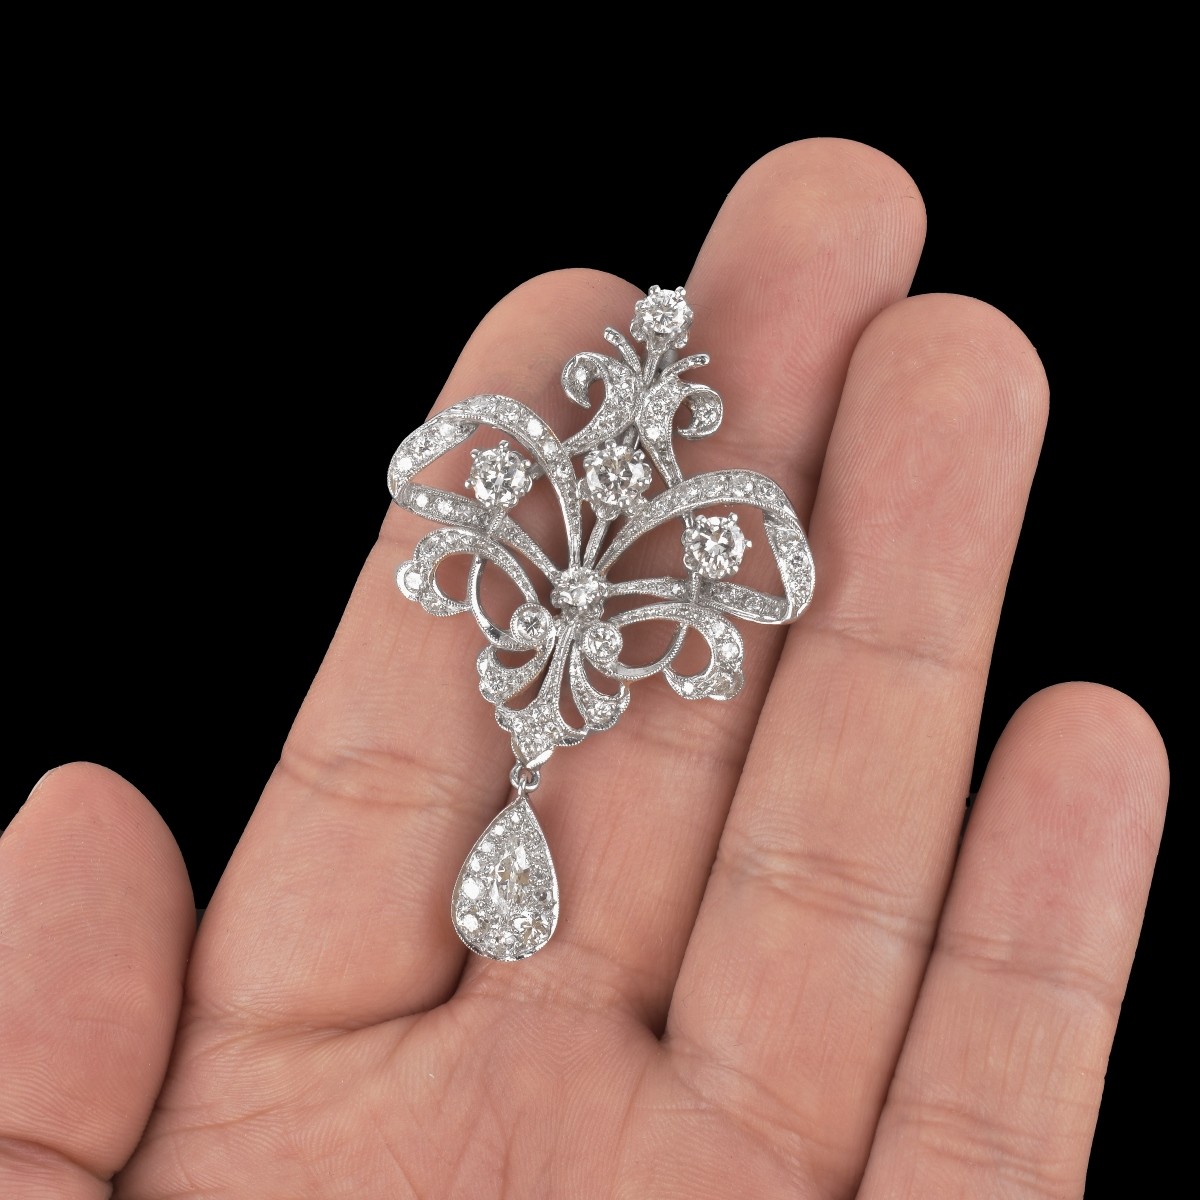 Victorian style Diamond and 18K Brooch